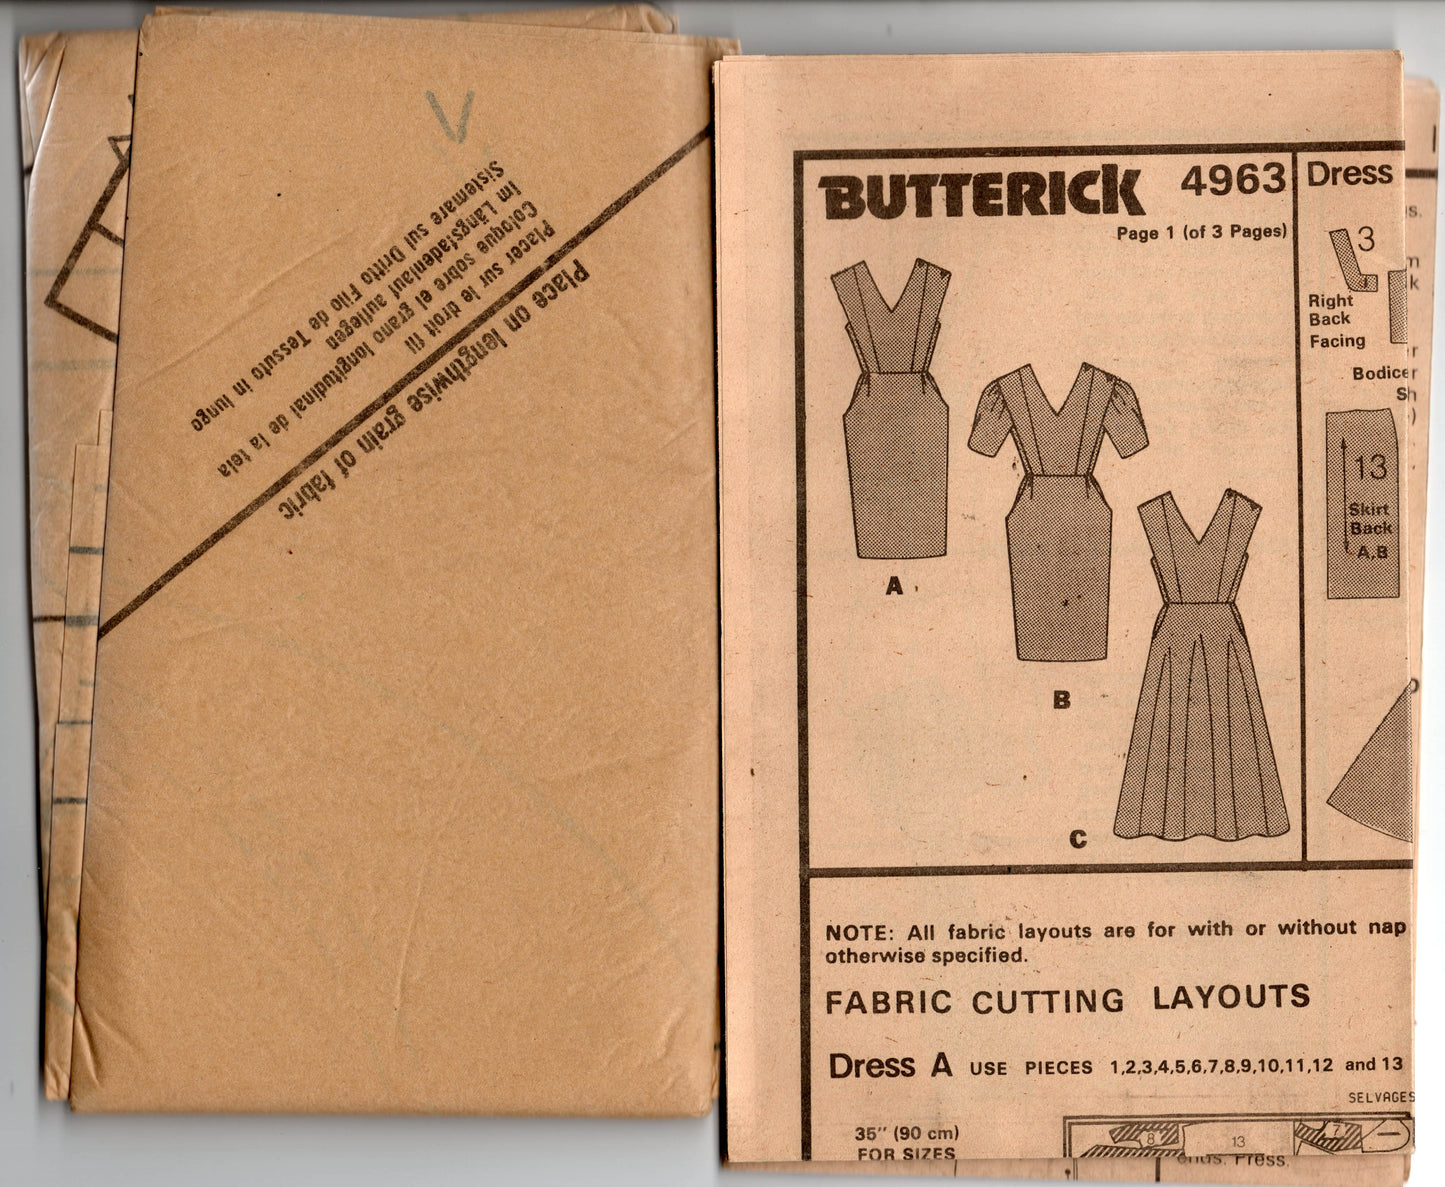 Butterick 4963 JANET RUSSO Womens Buttoned Shoulder Dress with Pockets 1980s Vintage Sewing Pattern Size 12 Bust 34 inches UNCUT Factory Folded